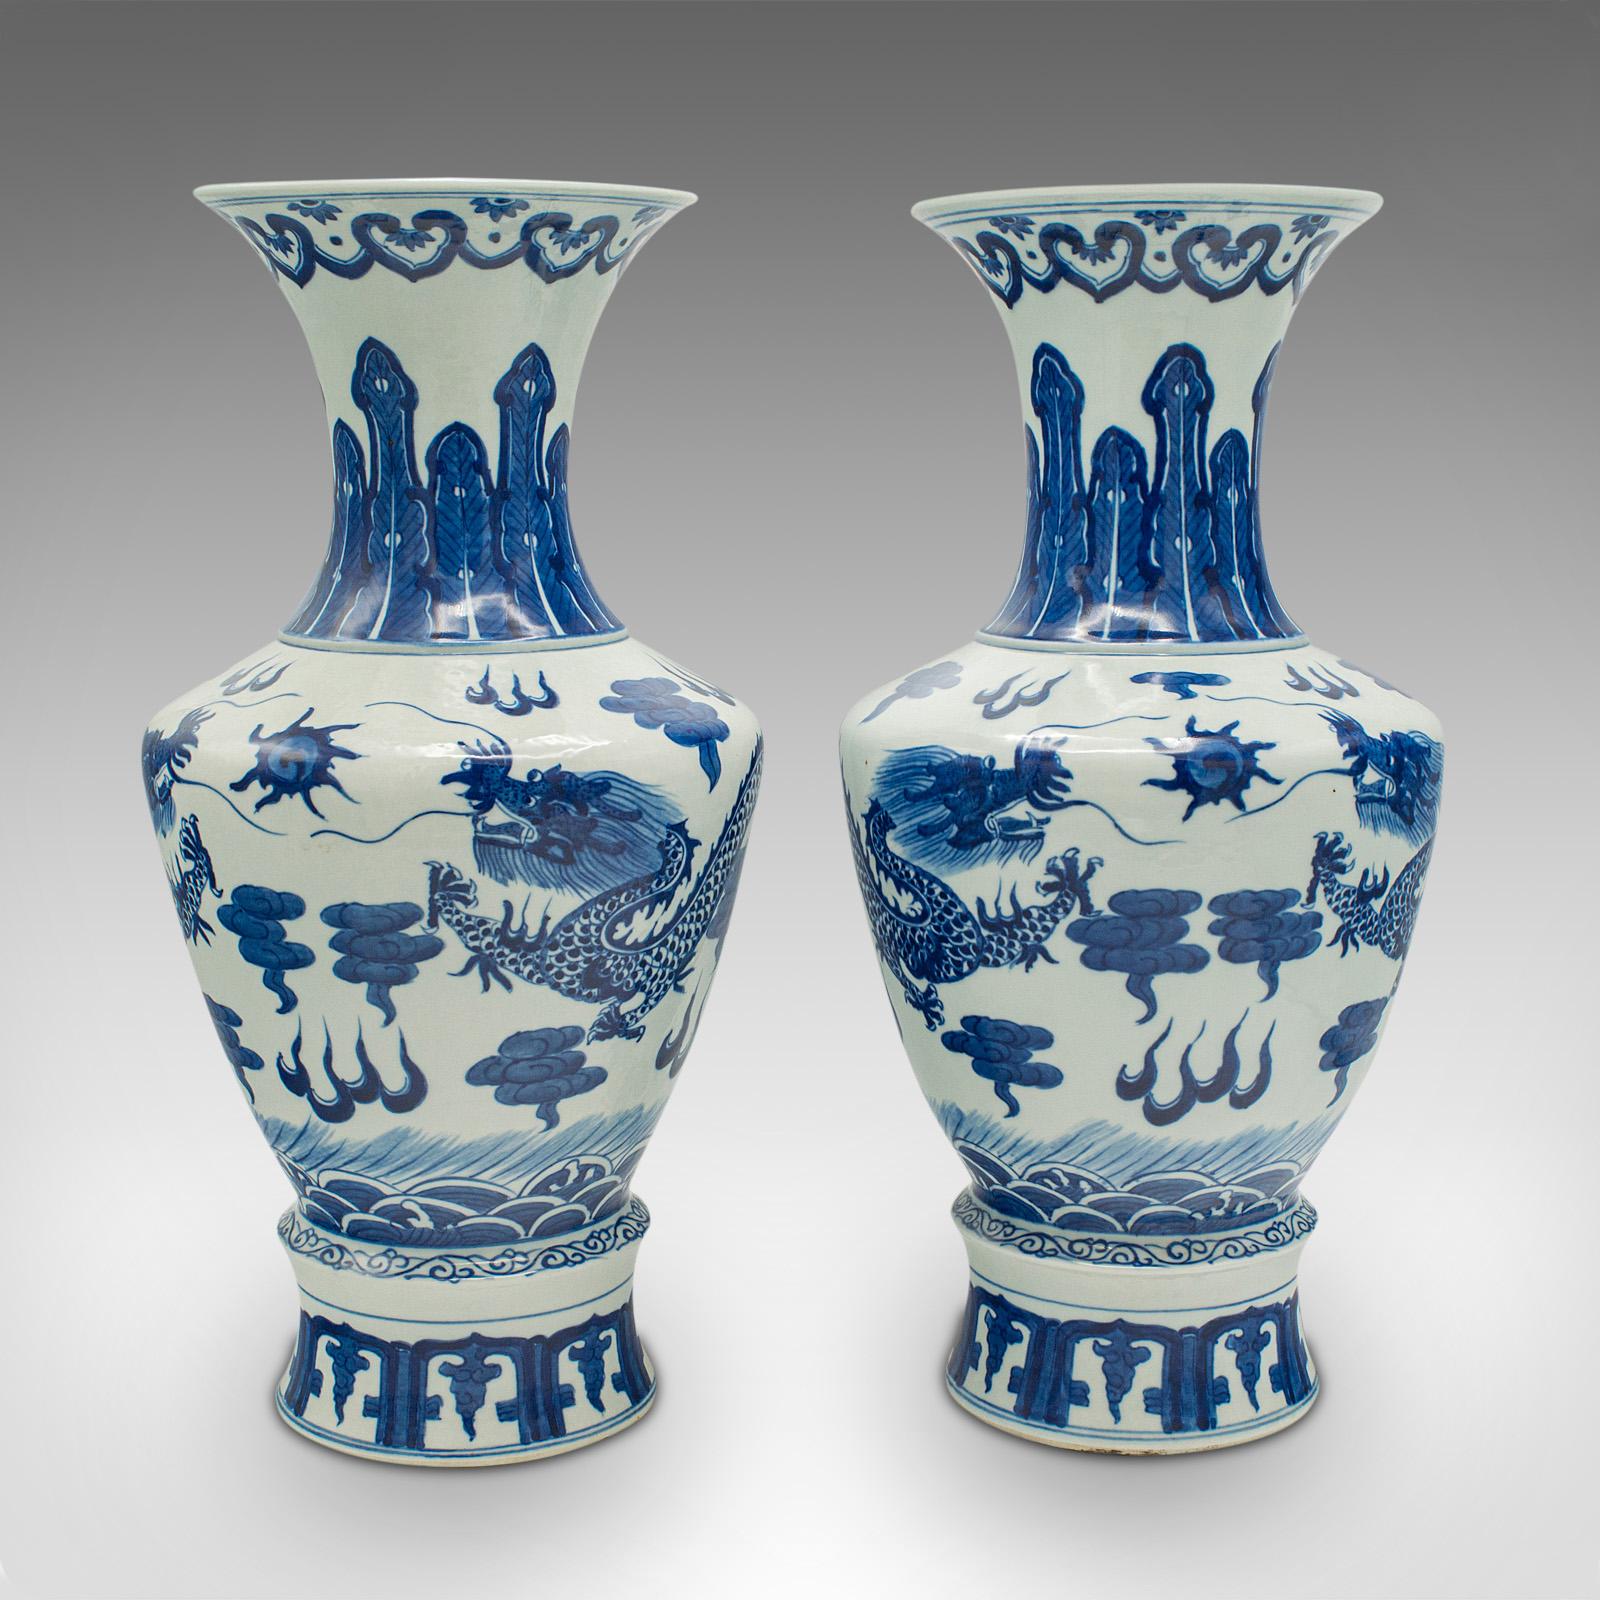 This is a pair of vintage baluster vases. A Chinese, ceramic decorative display urn, dating to the late Art Deco period, circa 1940.

Graced with the iconic white and blue finish
Displaying a desirable aged patina, free of marks or cracks
White